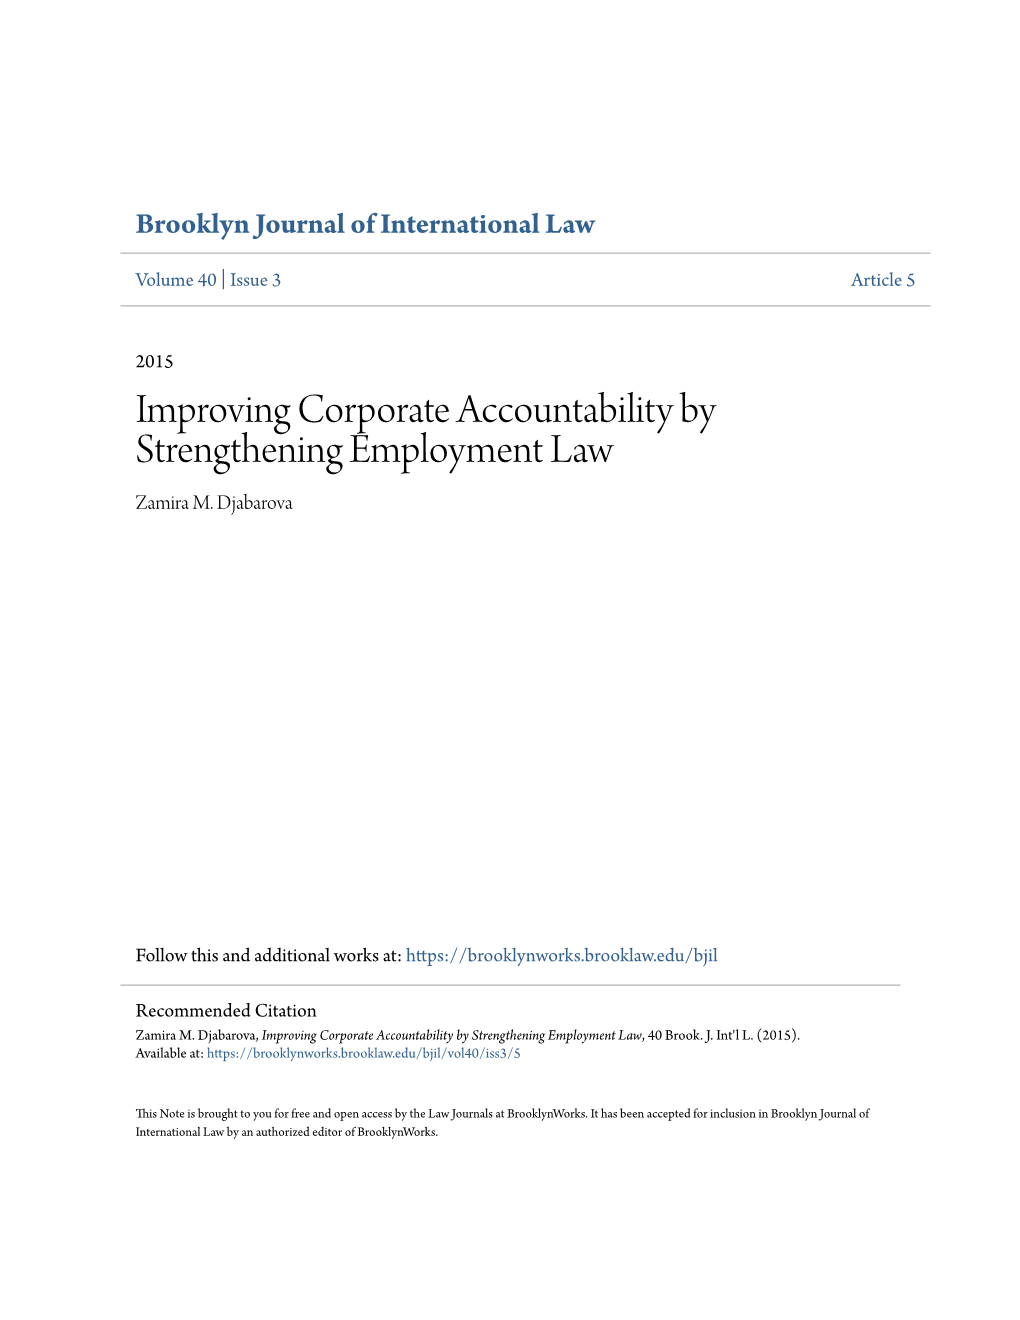 Improving Corporate Accountability by Strengthening Employment Law Zamira M